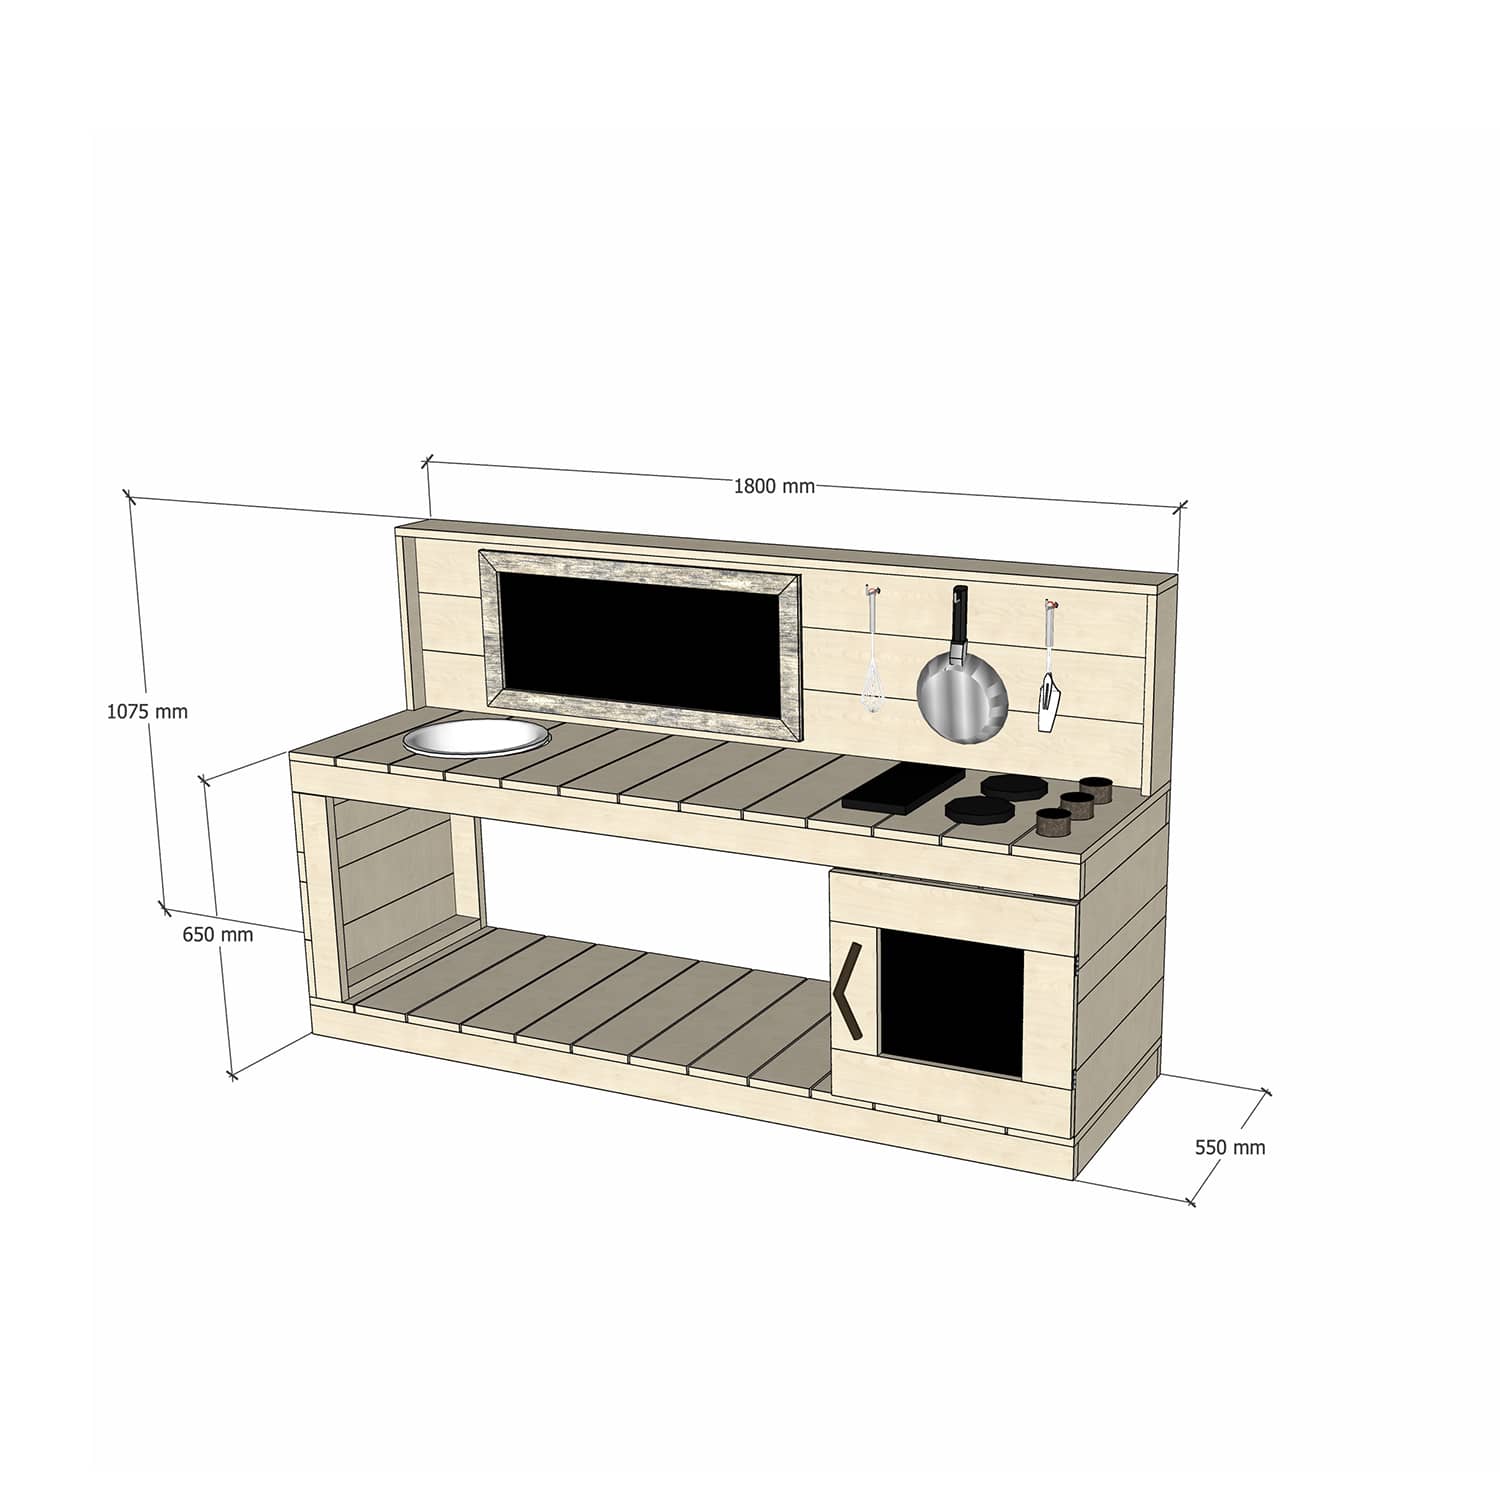 Medium Pine Wooden Play Kitchen 650mm Bench Top Sink Stovetop Oven